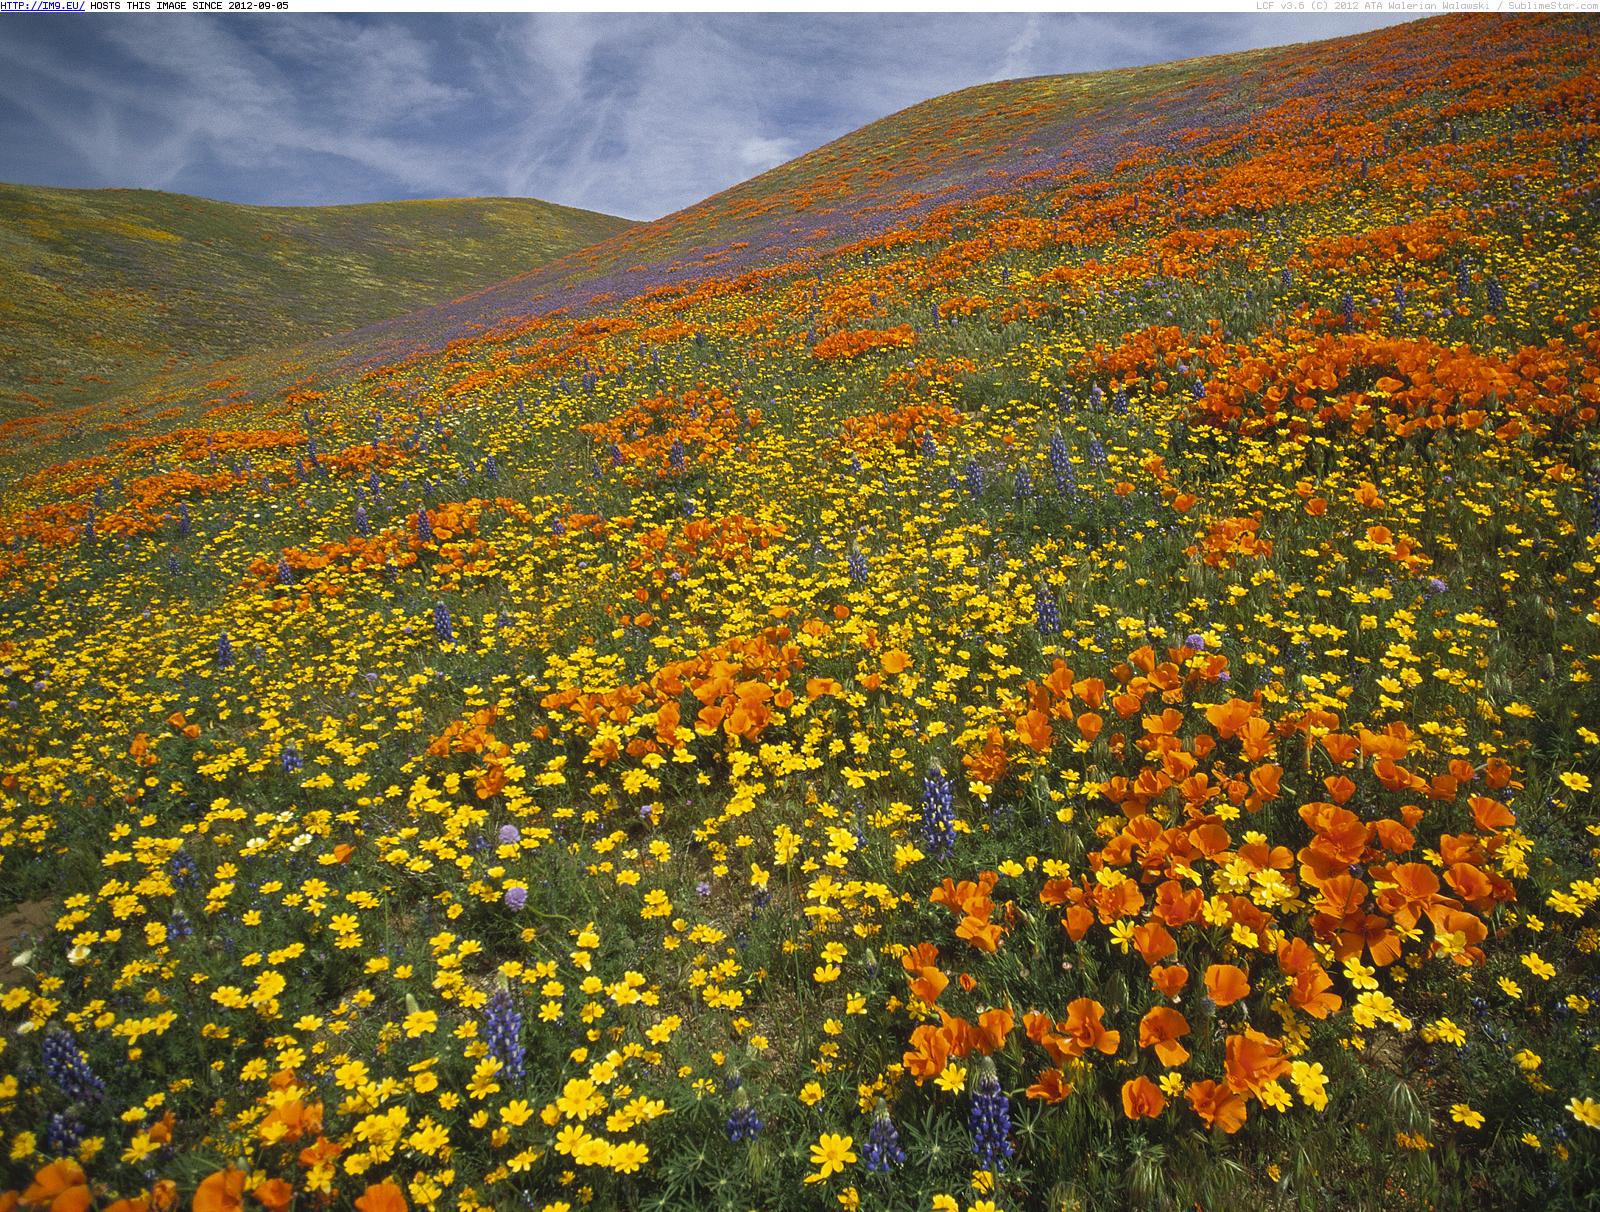 Poppy Field, California (in Beautiful photos and wallpapers)